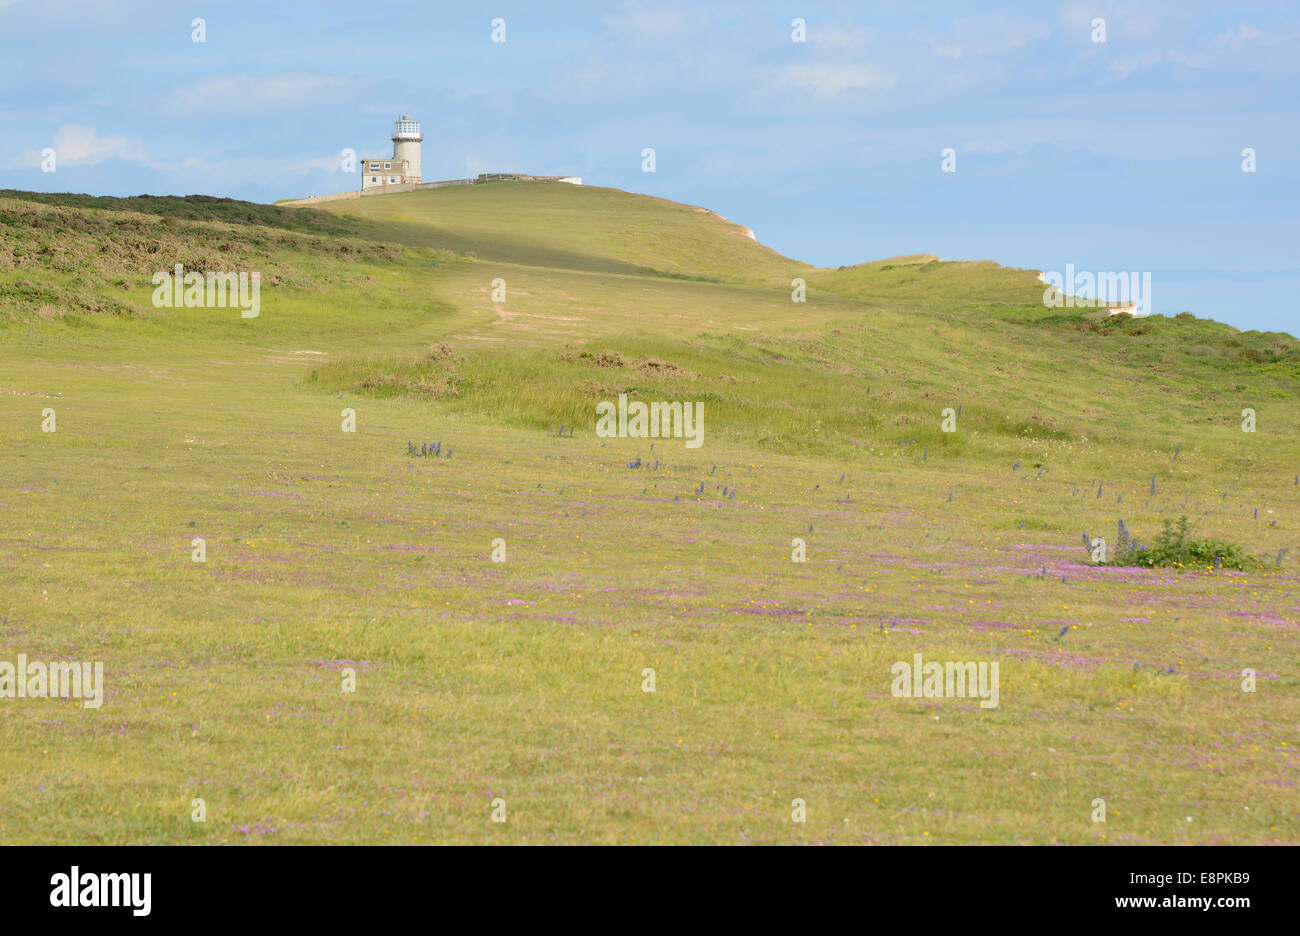 The Belle Tout lighthouse on top of Beachy Head near Eastbourn., East Sussex. England Stock Photo